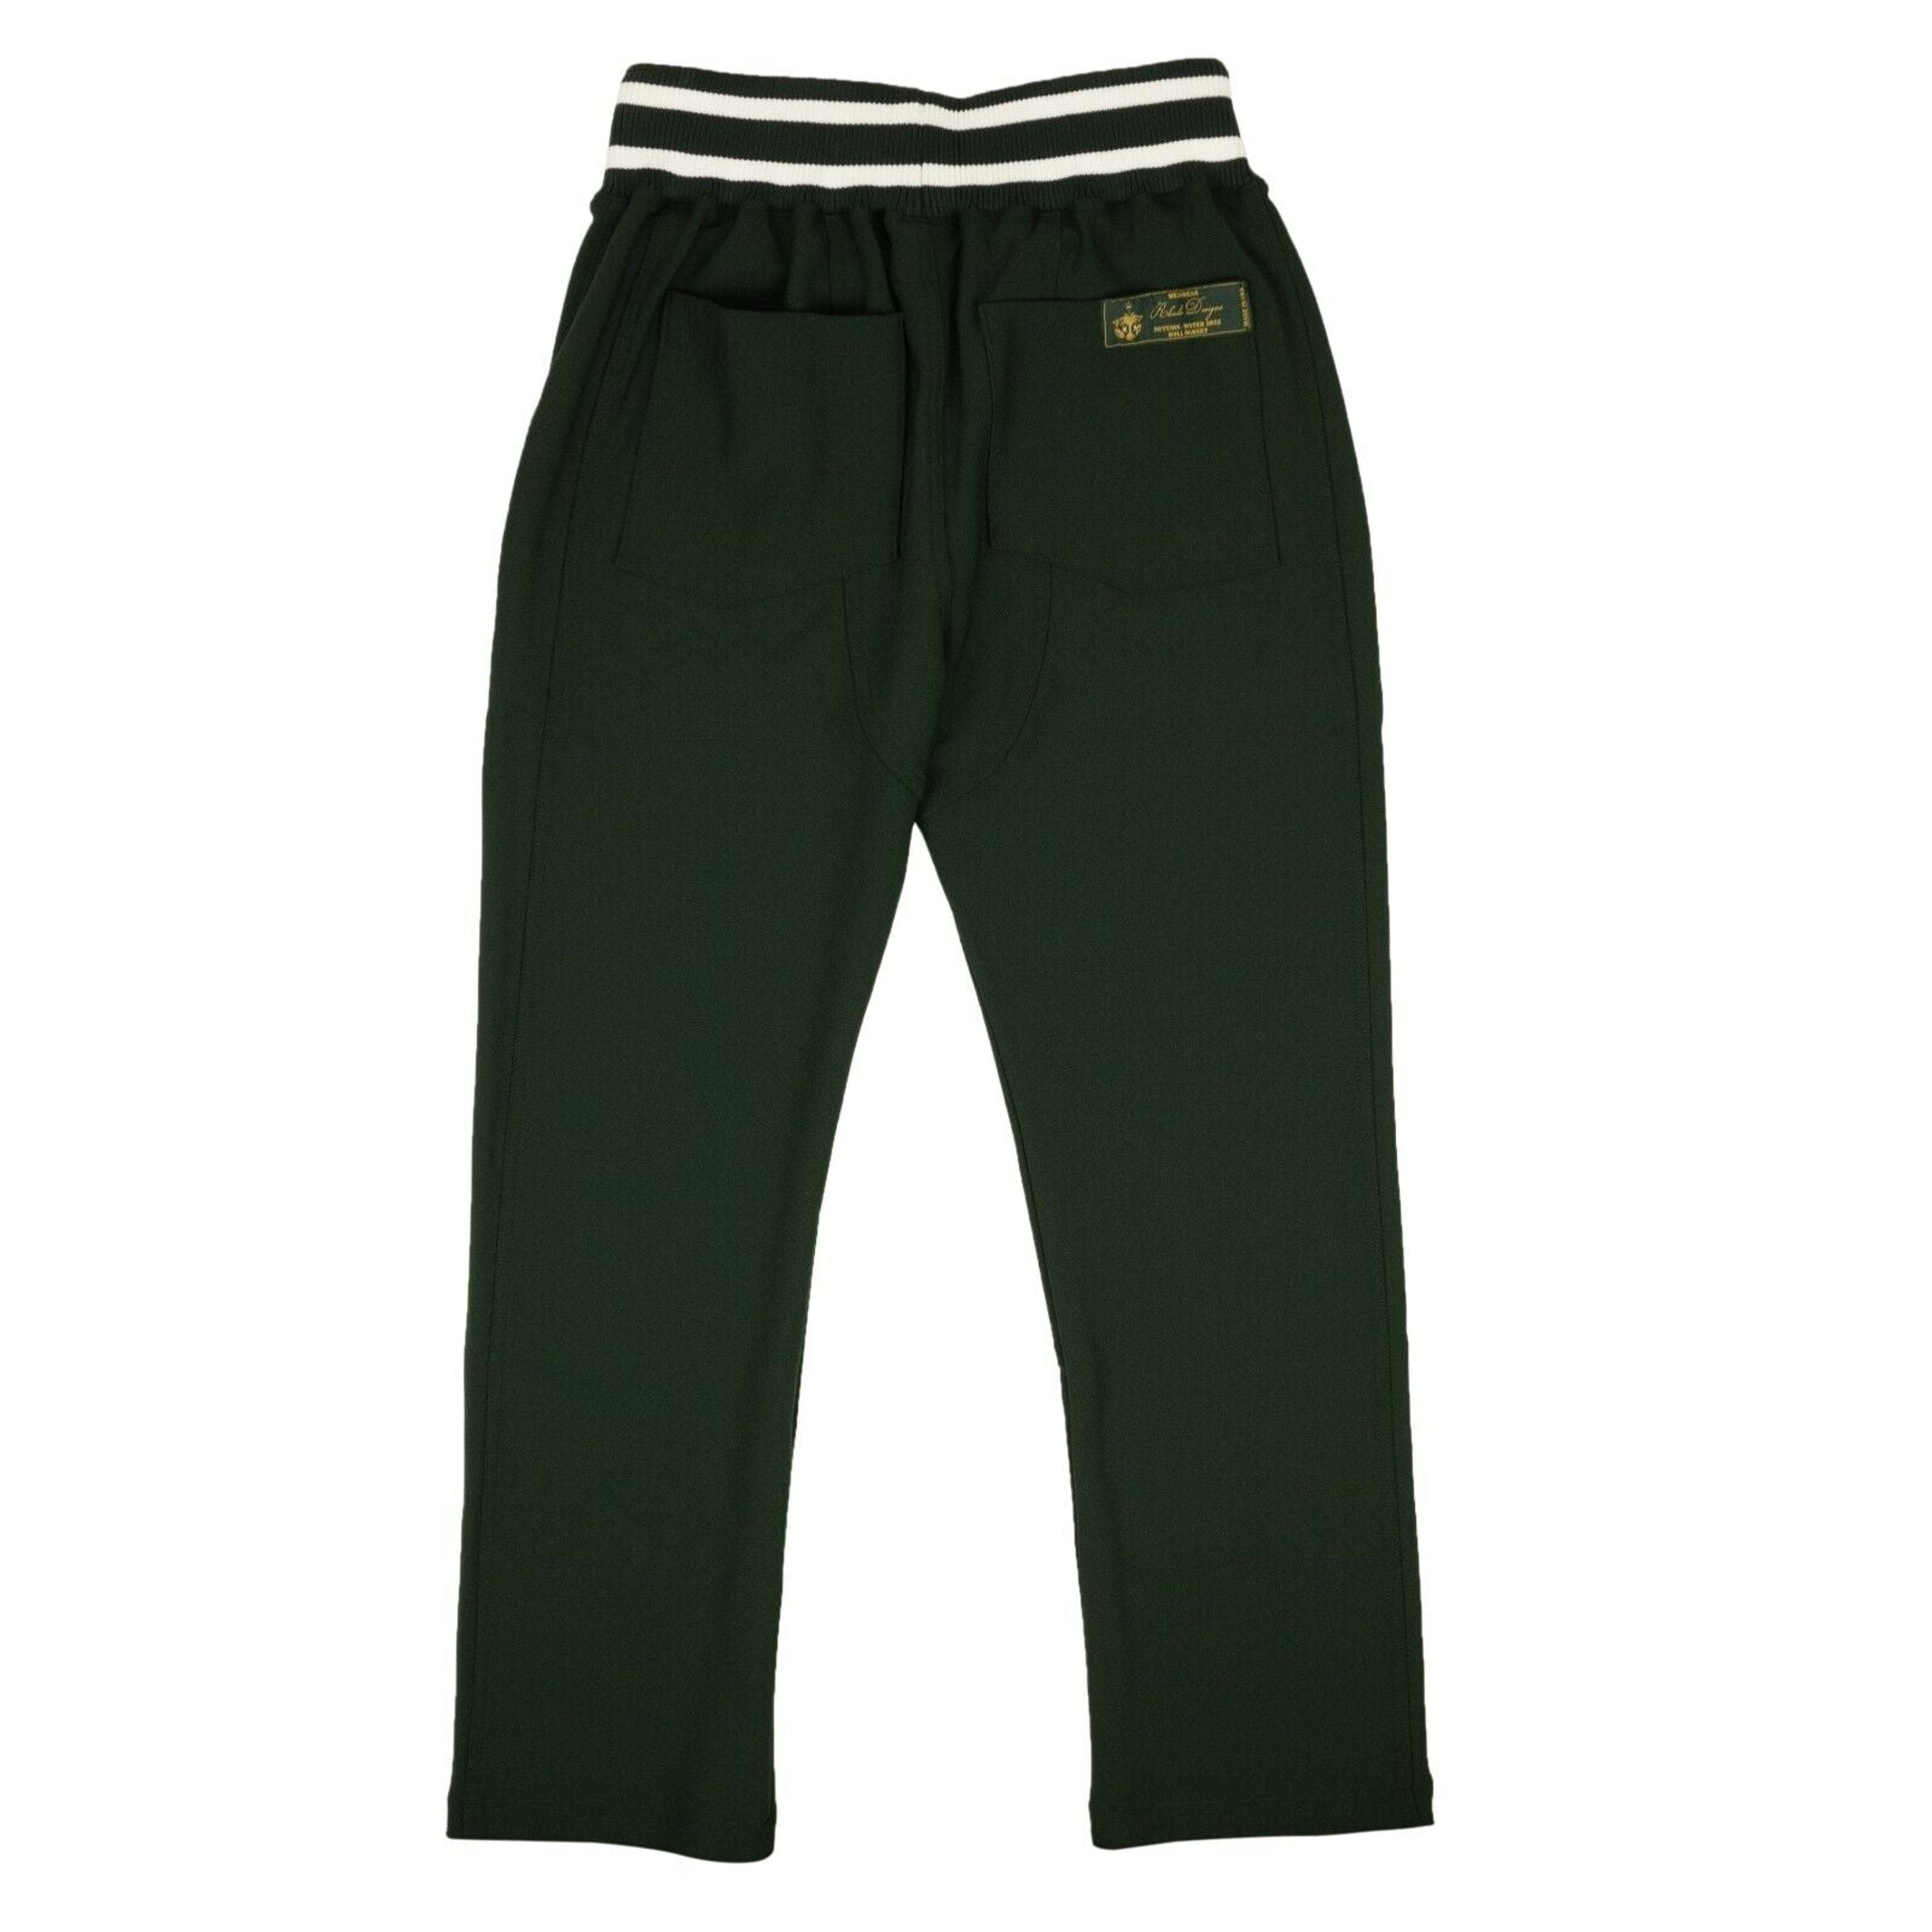 Alternate View 2 of Forest Green Polyester Tracksuit Ribbed Pants